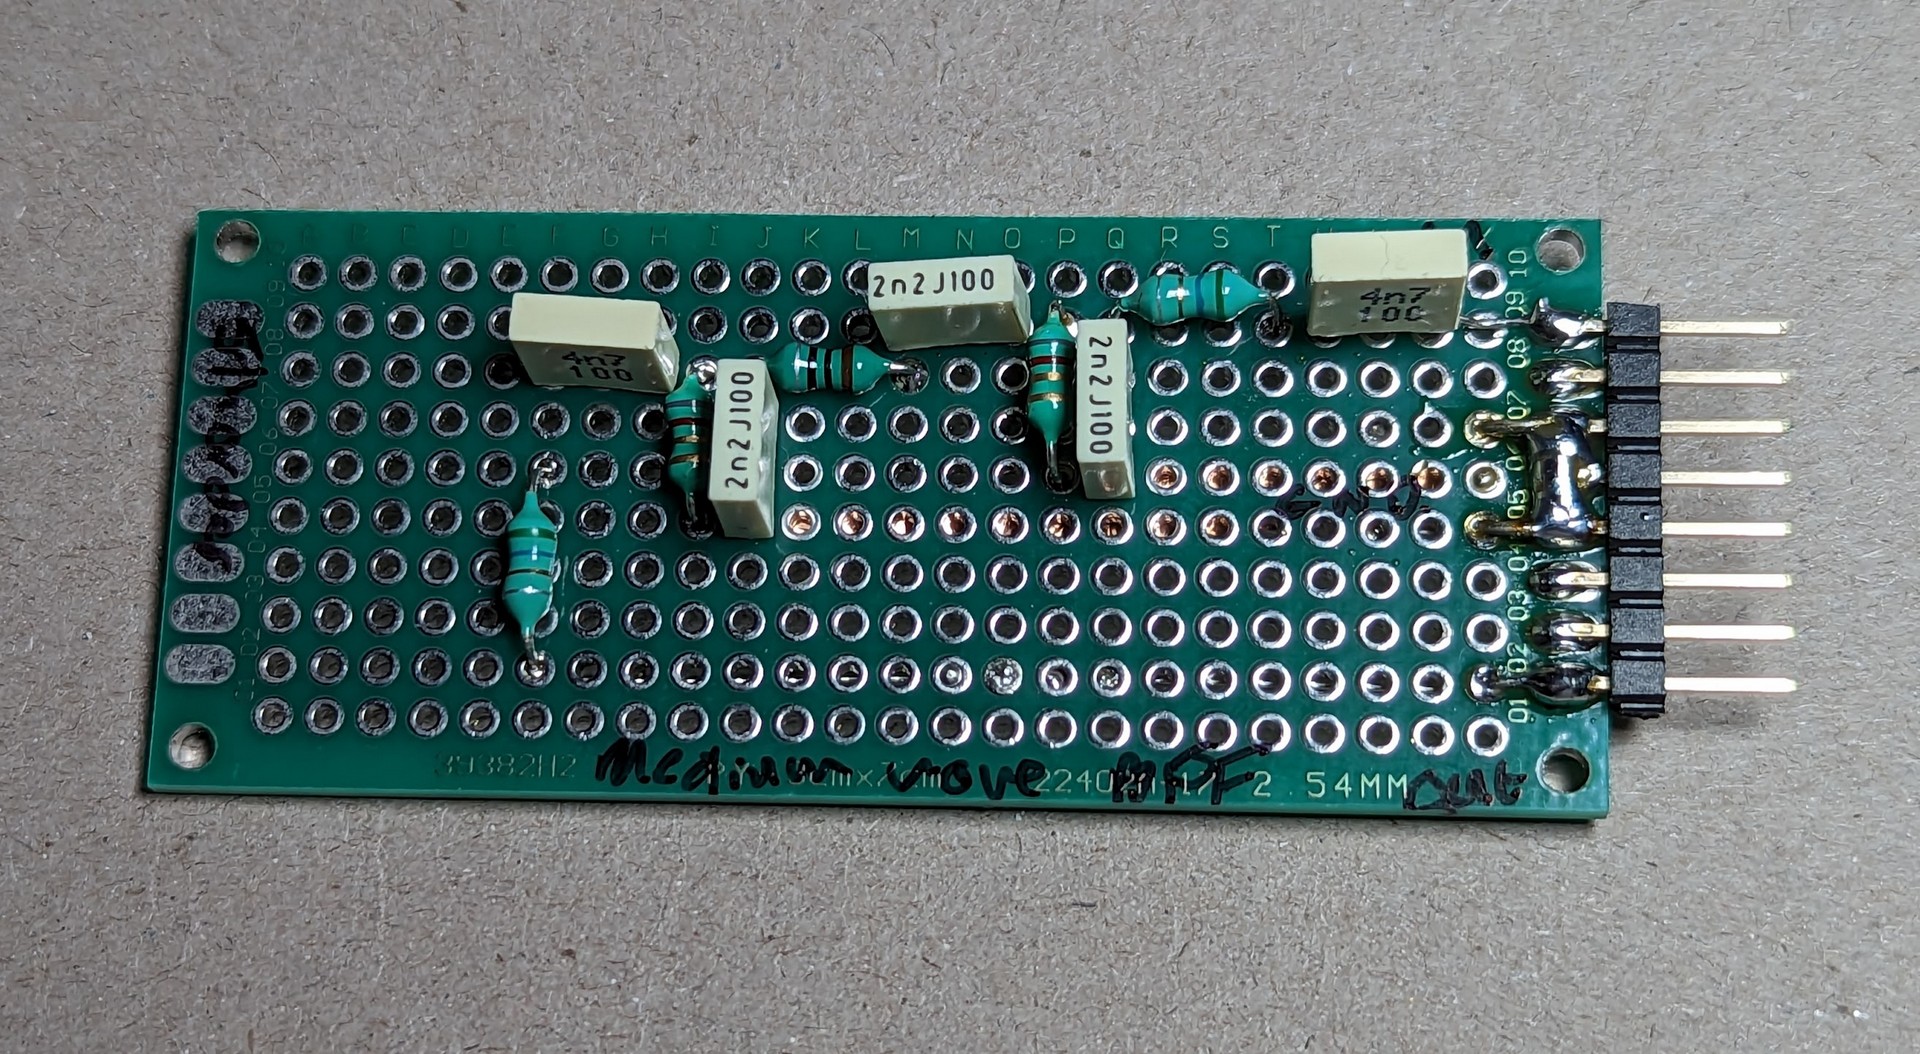 Filter rebuilt on protoboard. Input is top right, ground is the three central pins and output is the bottom right pin.